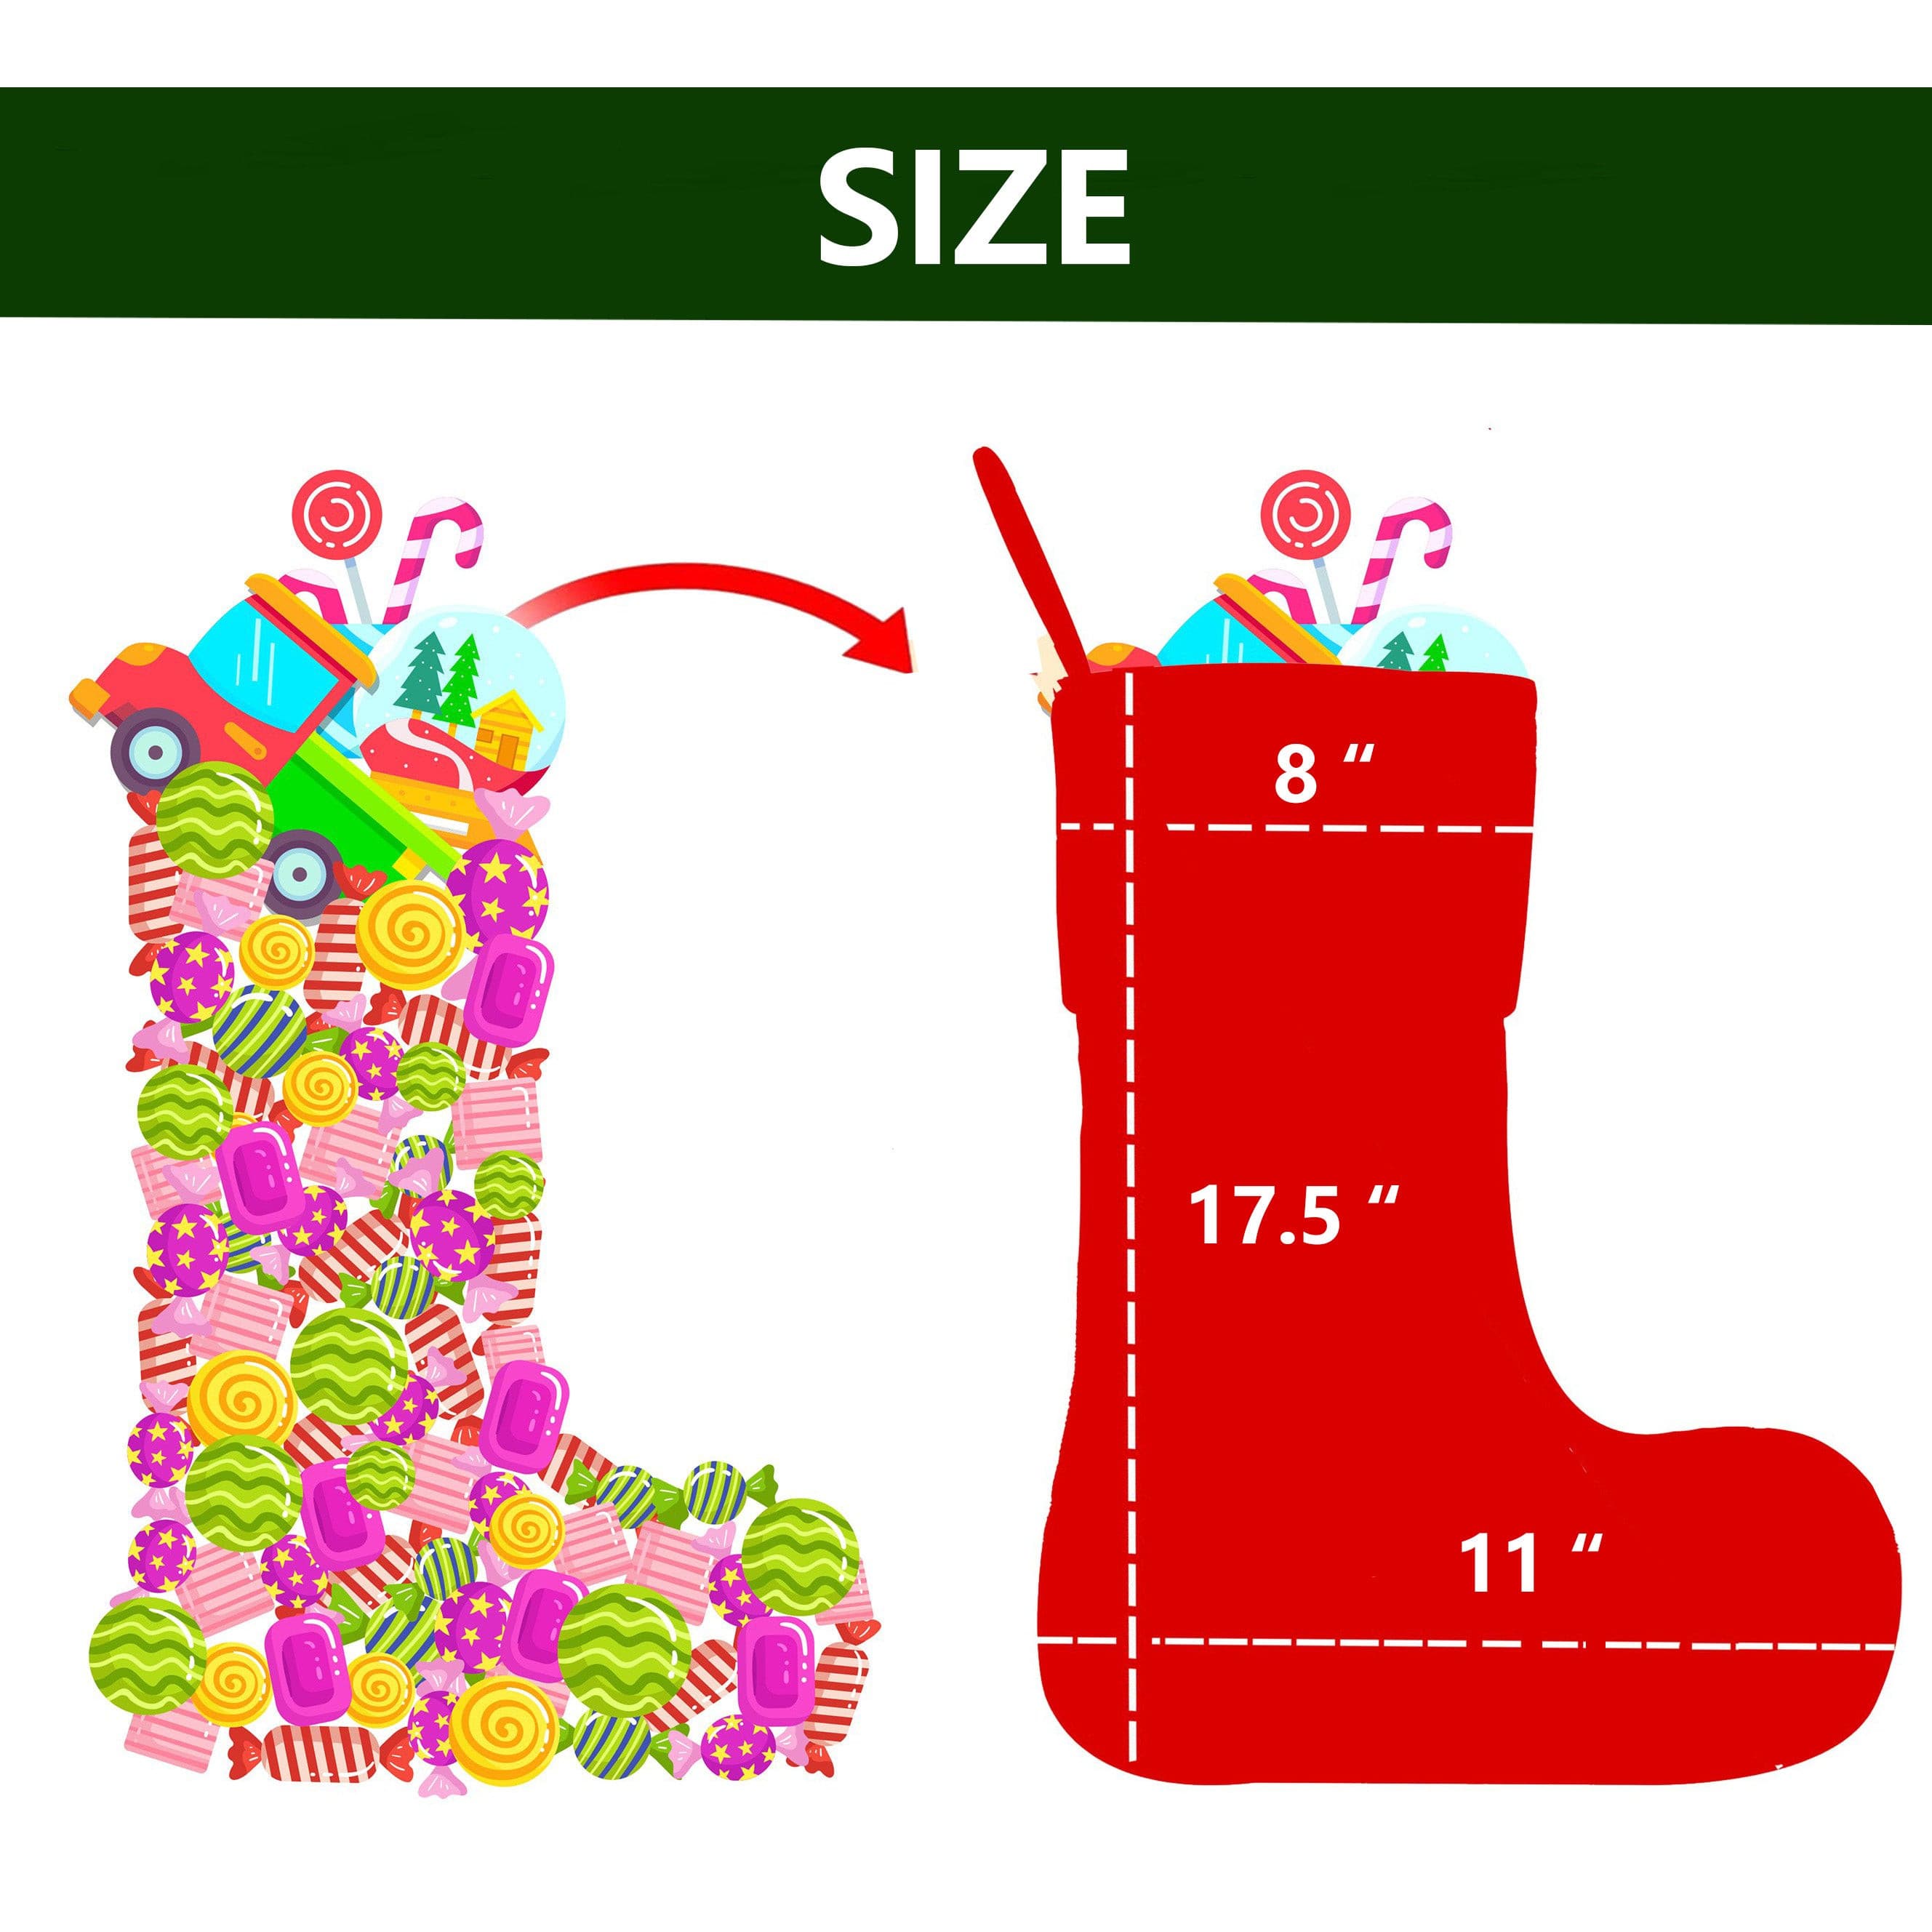 Personalized Christmas stocking Velvet Lovely Embroidery Pattern Family gift Decorations Xmas Holiday -KTR.